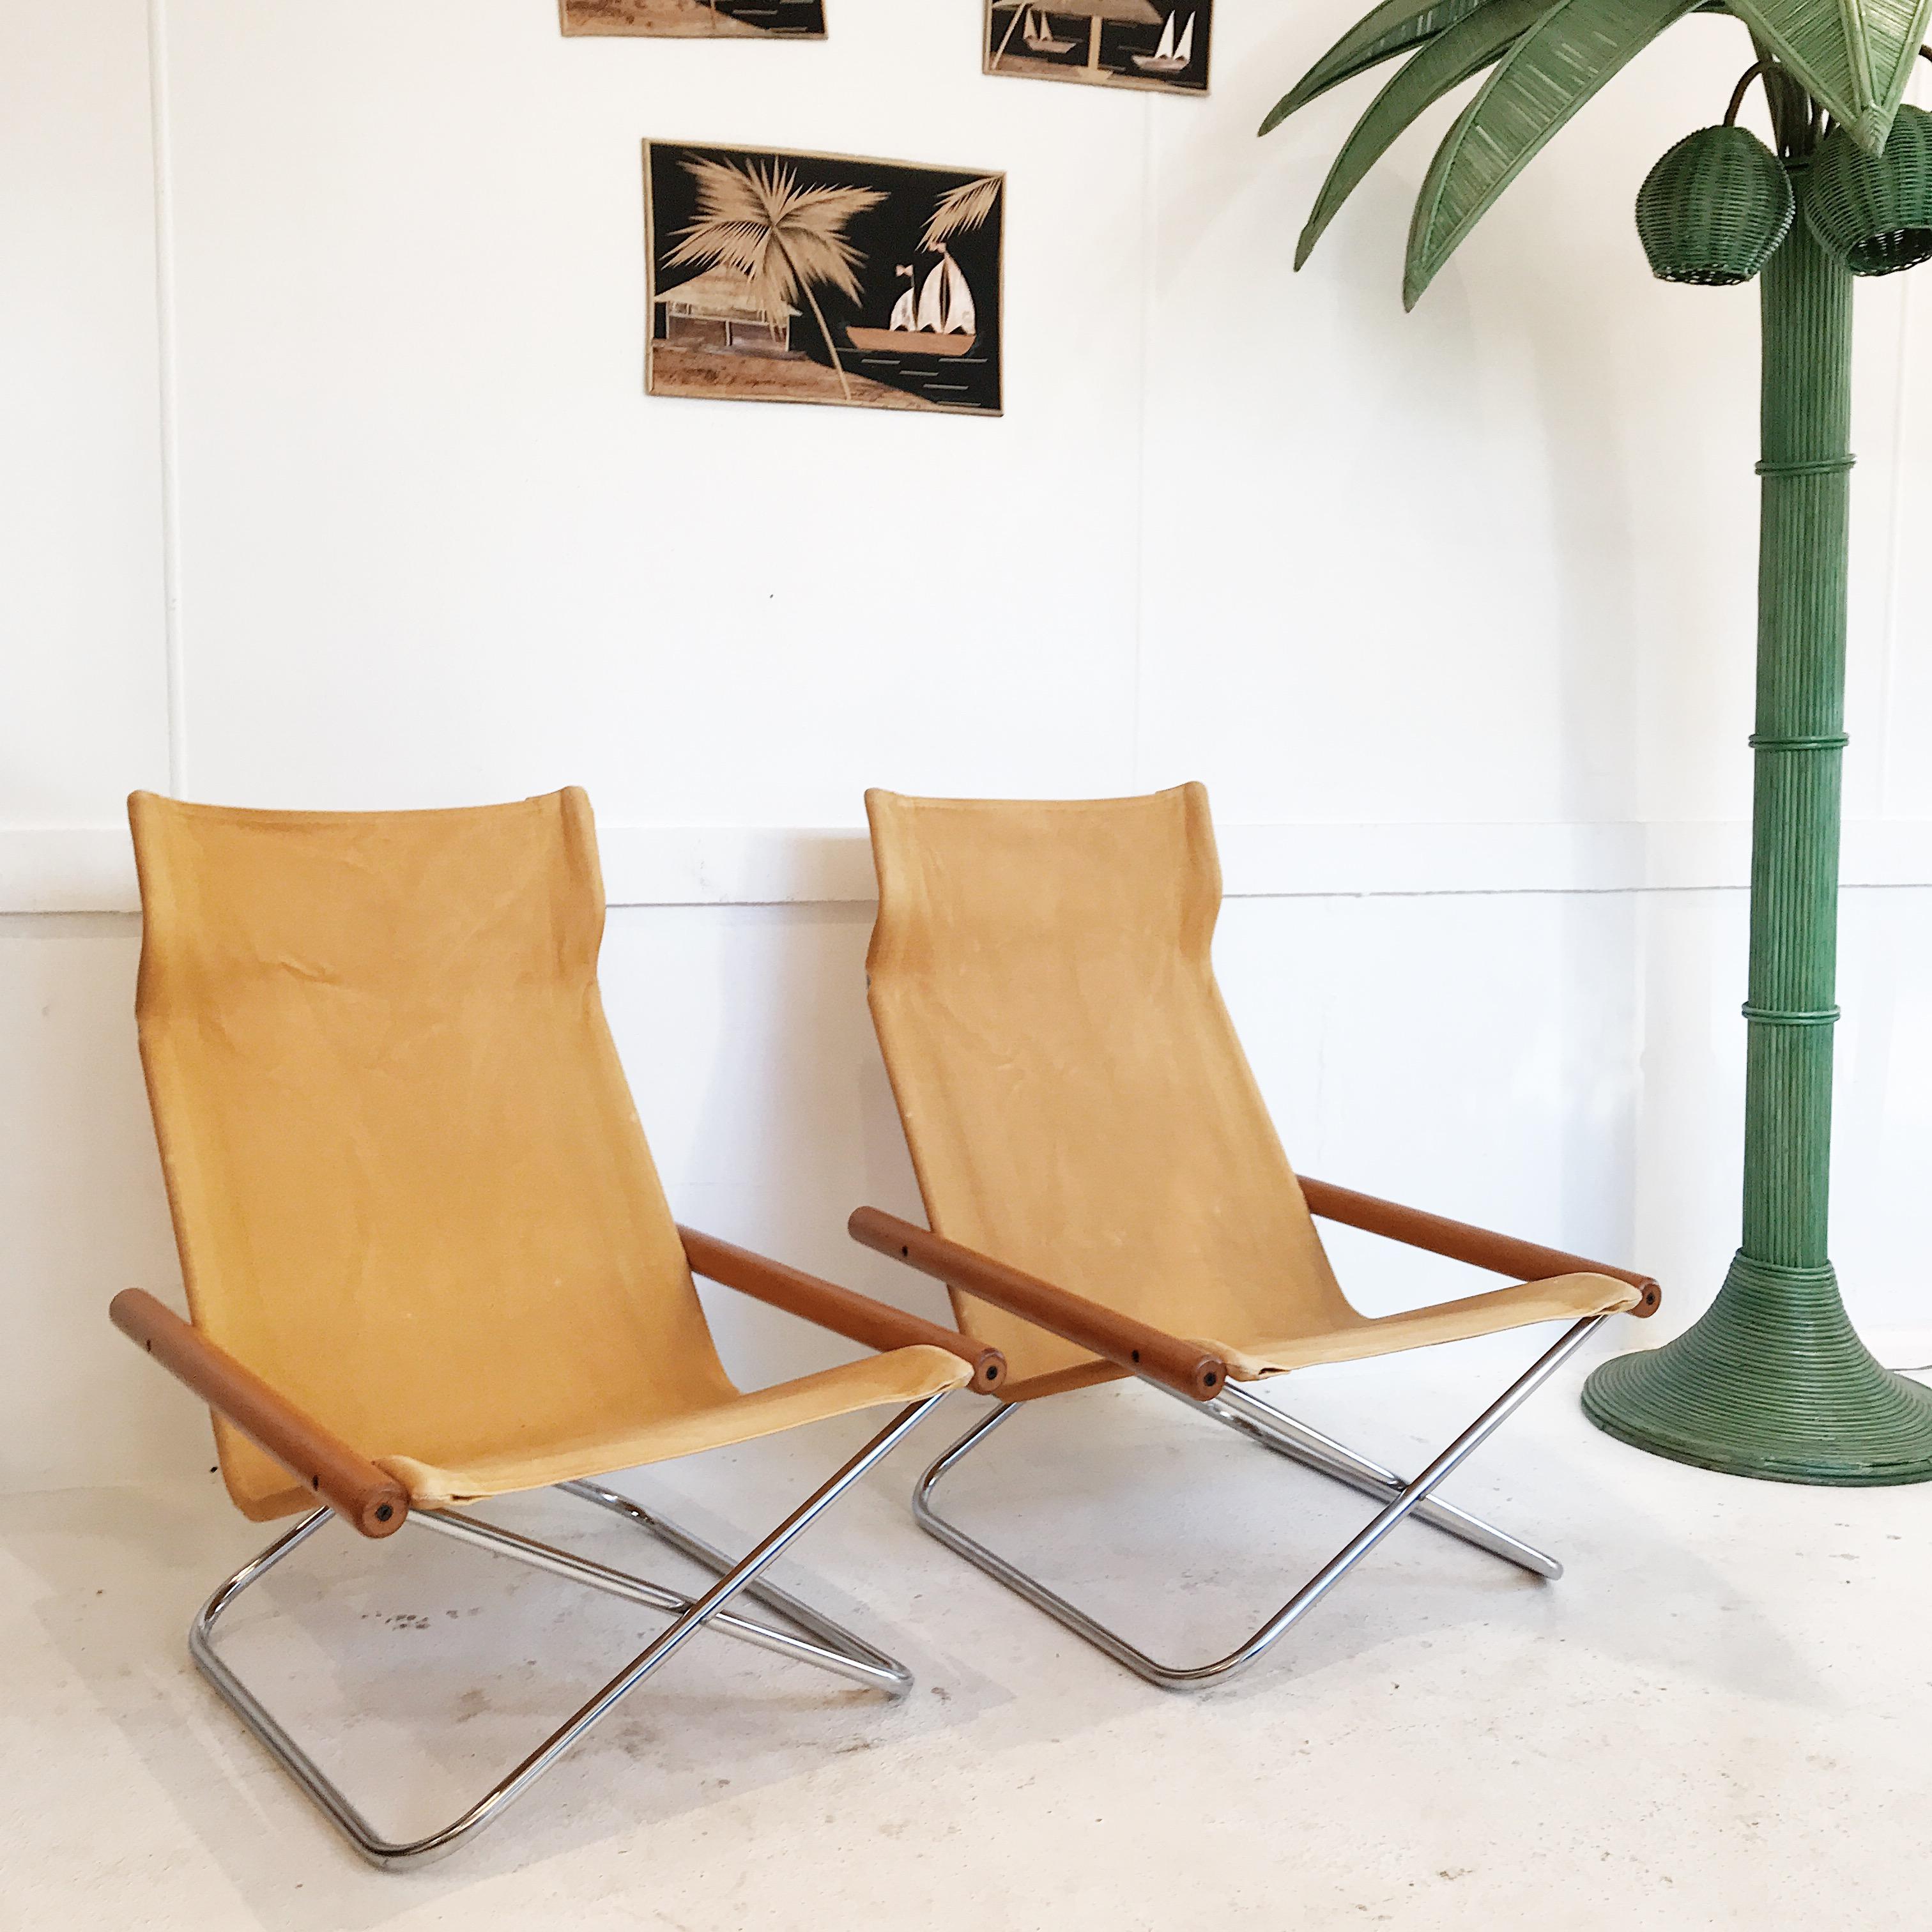 Japanese Vintage All Original Pair of NY Chairs Designed by Takeshi Nii for Trend Pacific